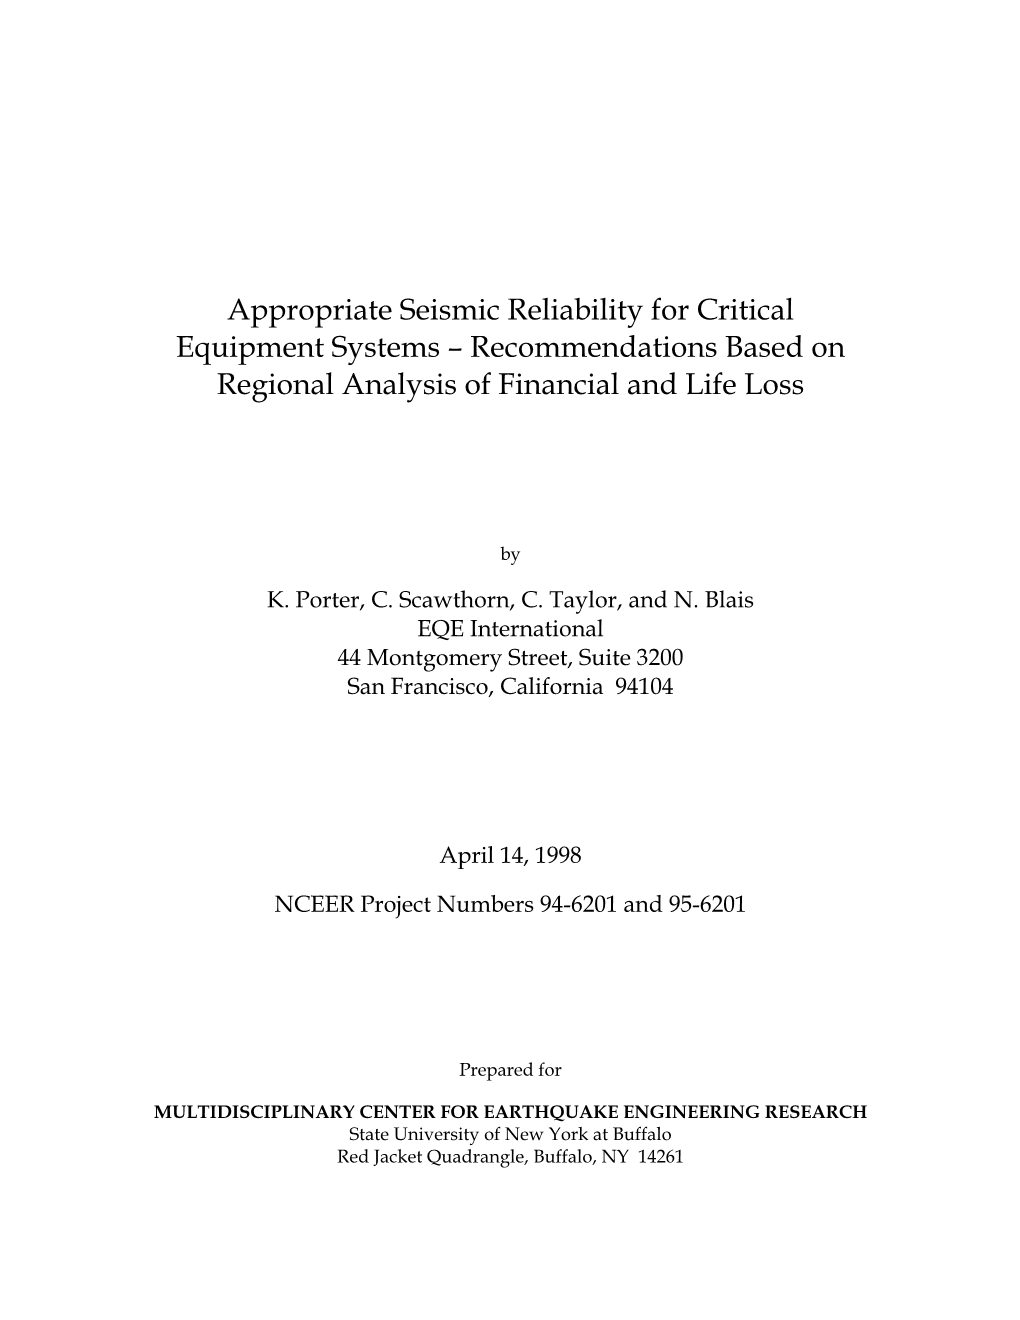 Appropriate Seismic Reliability for Critical Equipment Systems – Recommendations Based on Regional Analysis of Financial and Life Loss